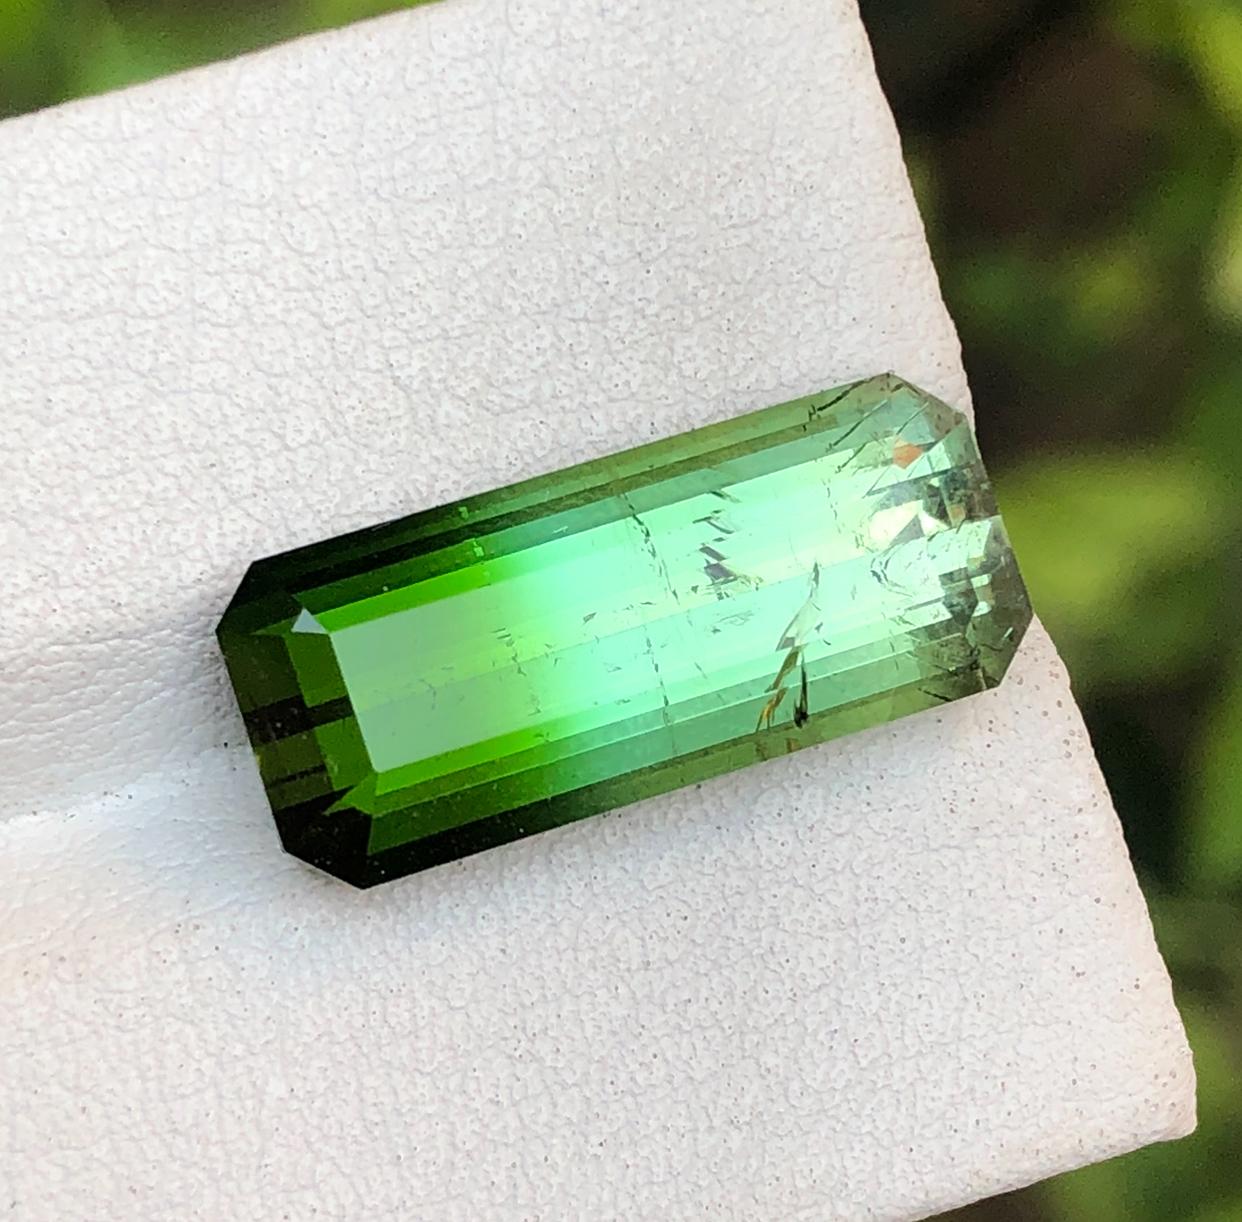 GEMSTONE TYPE: Tourmaline
PIECE(S): 1
WEIGHT: 9.85 Carats
SHAPE: Elongated Emerald Cut
SIZE (MM): 19.01 x 8.17 x 6.68
COLOR: Green Bicolor
CLARITY: Slightly Included 
TREATMENT: None
ORIGIN: Afghanistan
CERTIFICATE: On demand

Behold, a captivating